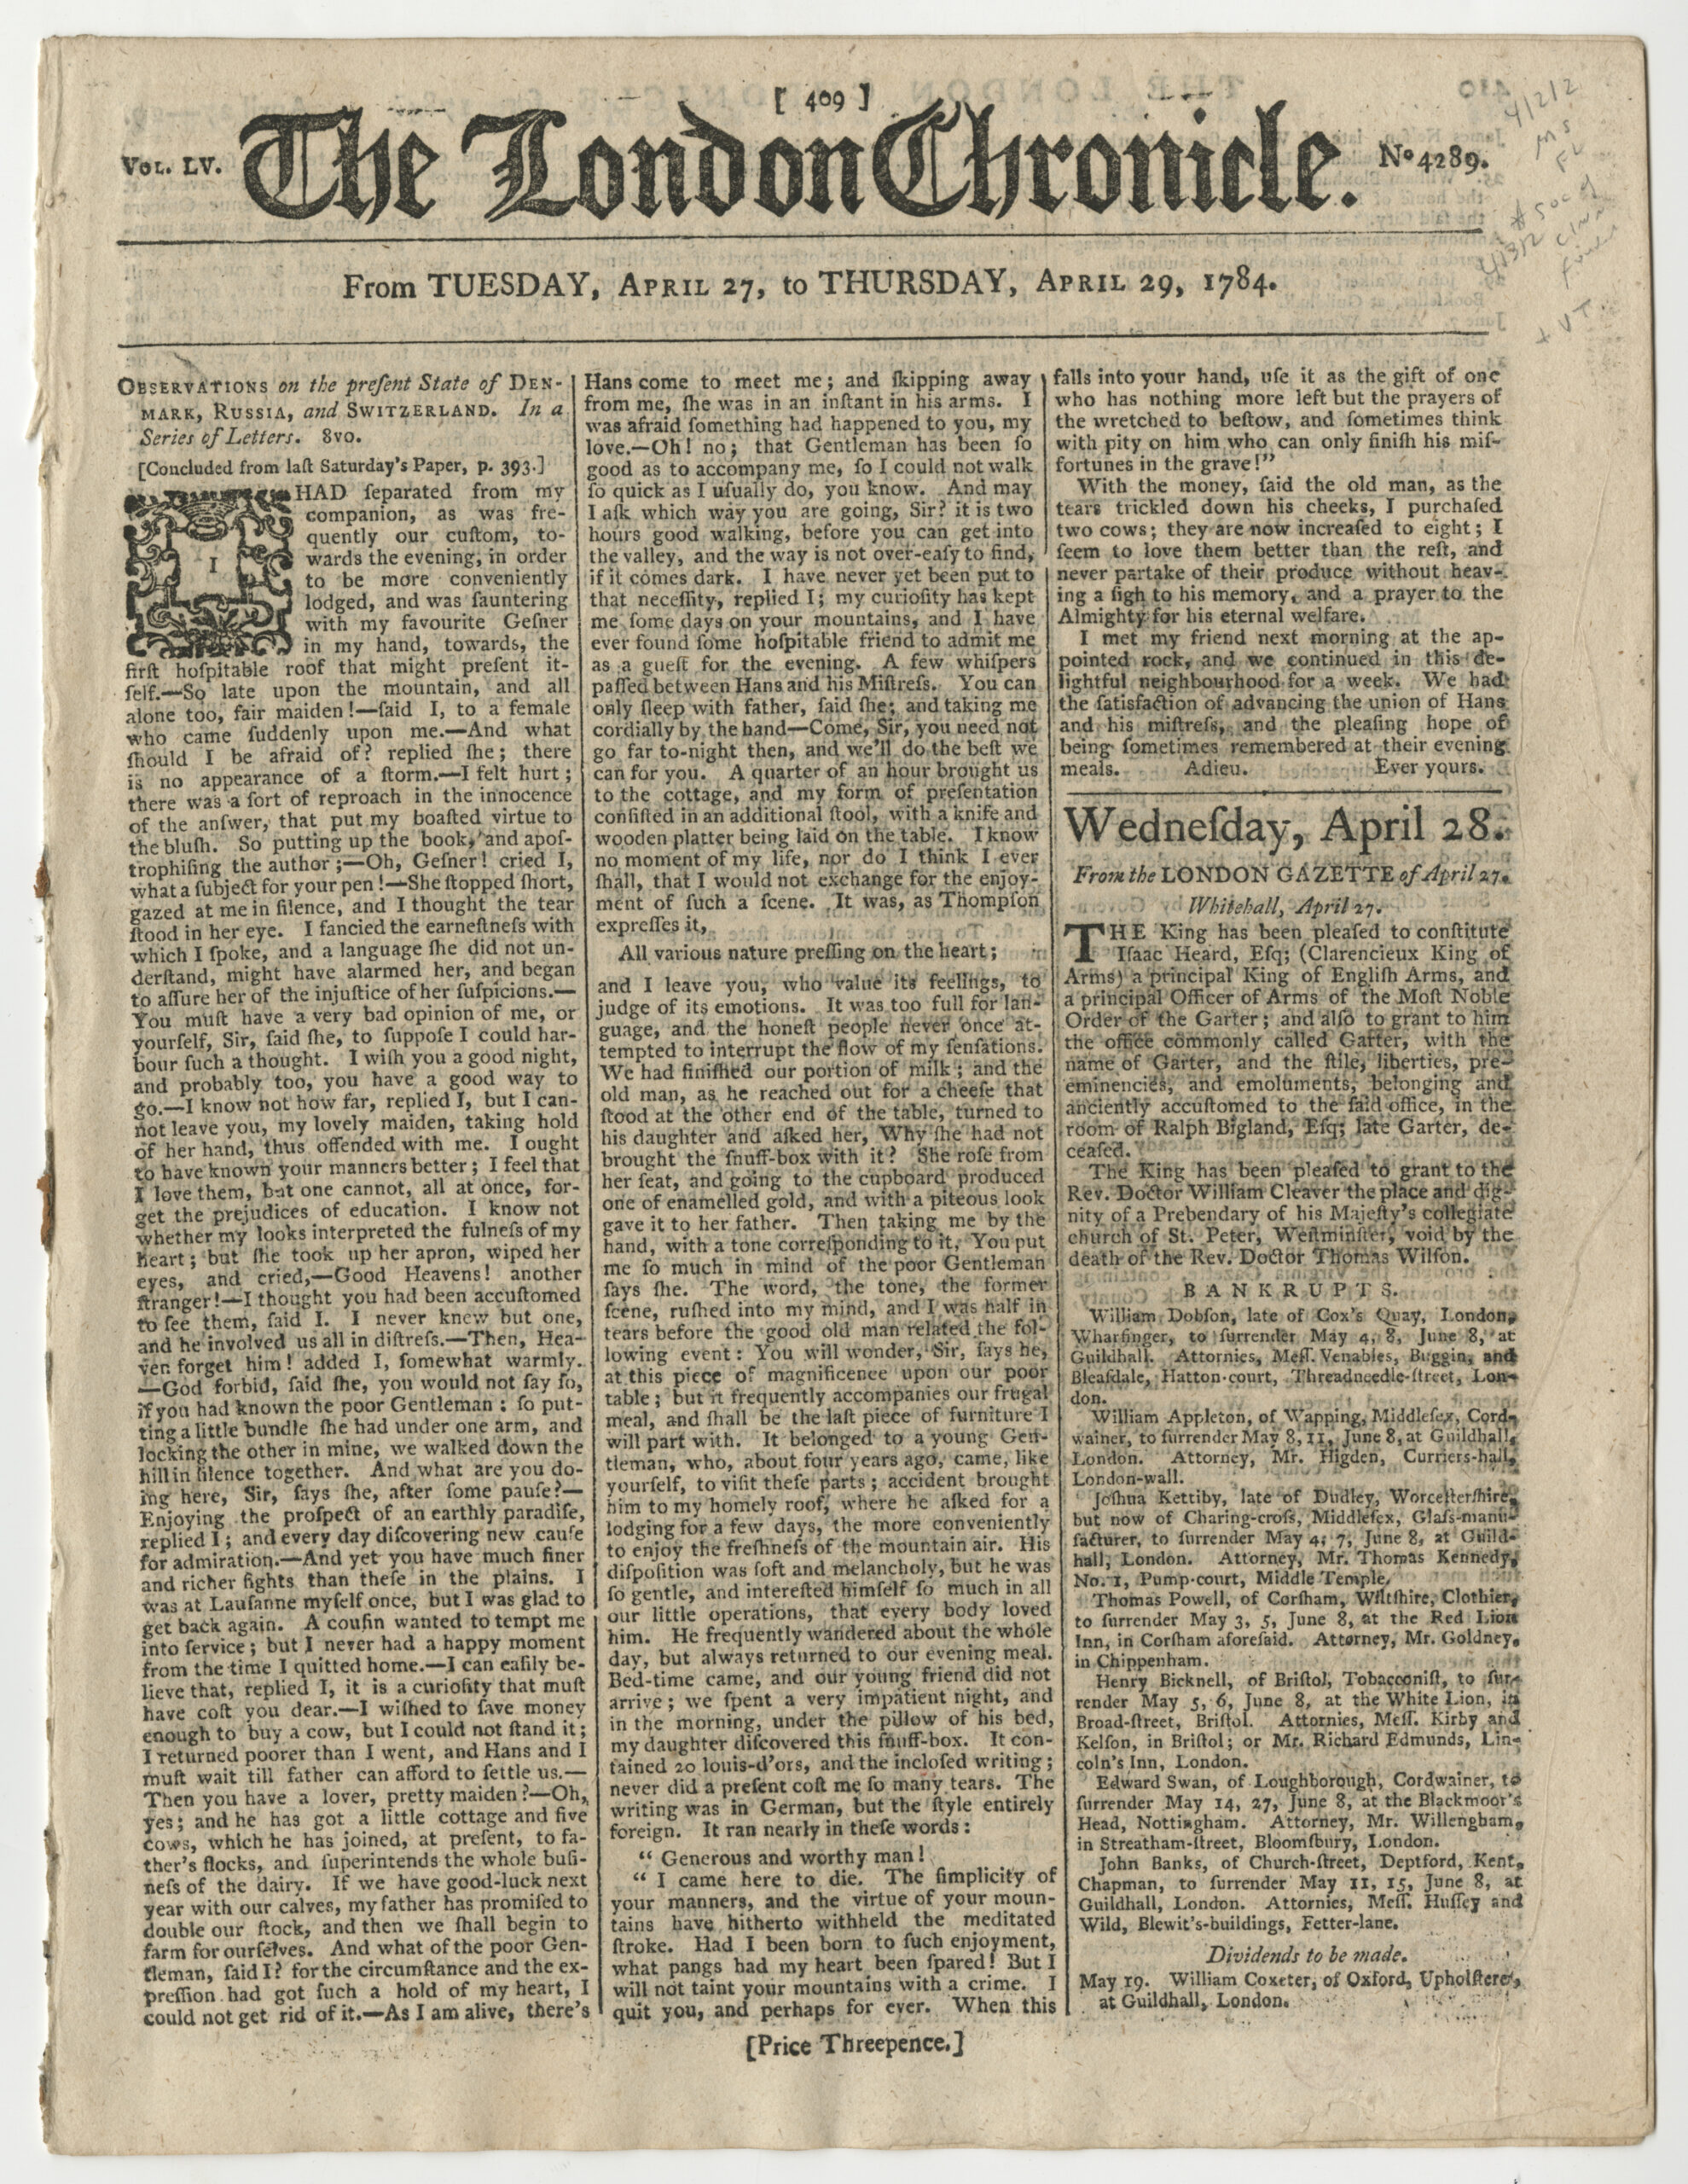 The London Chronicle London: Sold by J. Wilkie, April 27-29, 1784